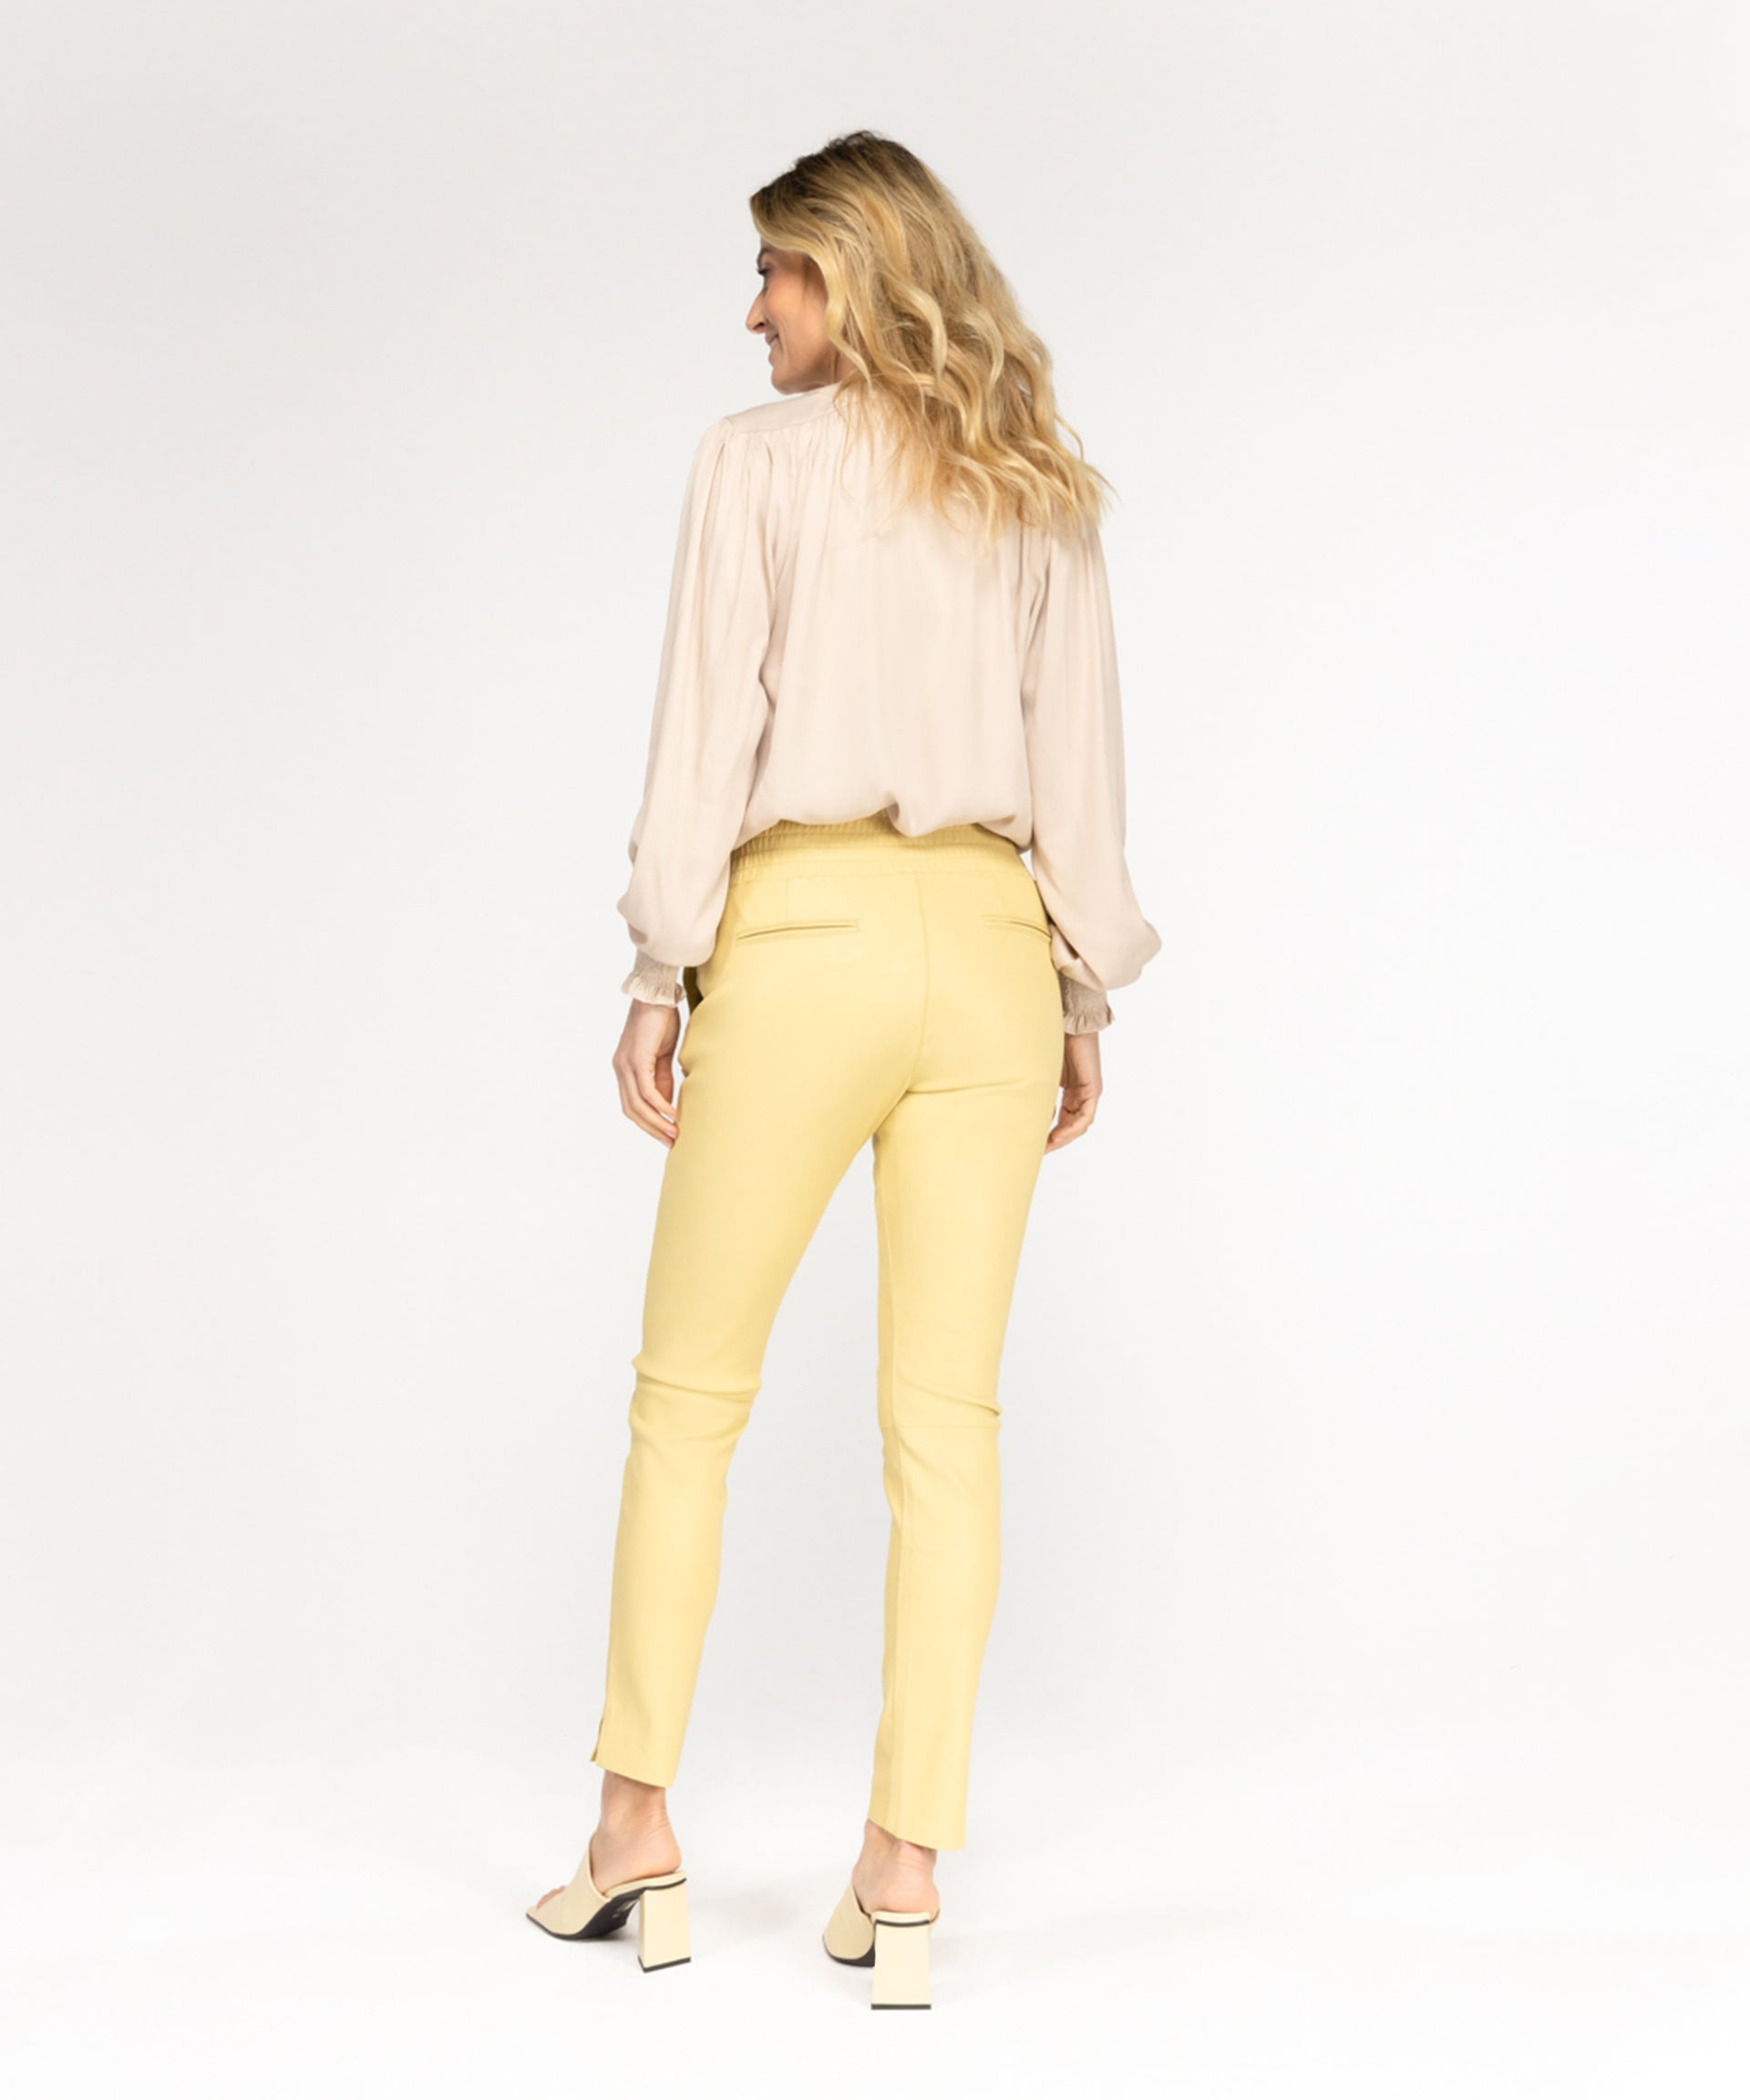 COLETTE BUTTERY YELLOW